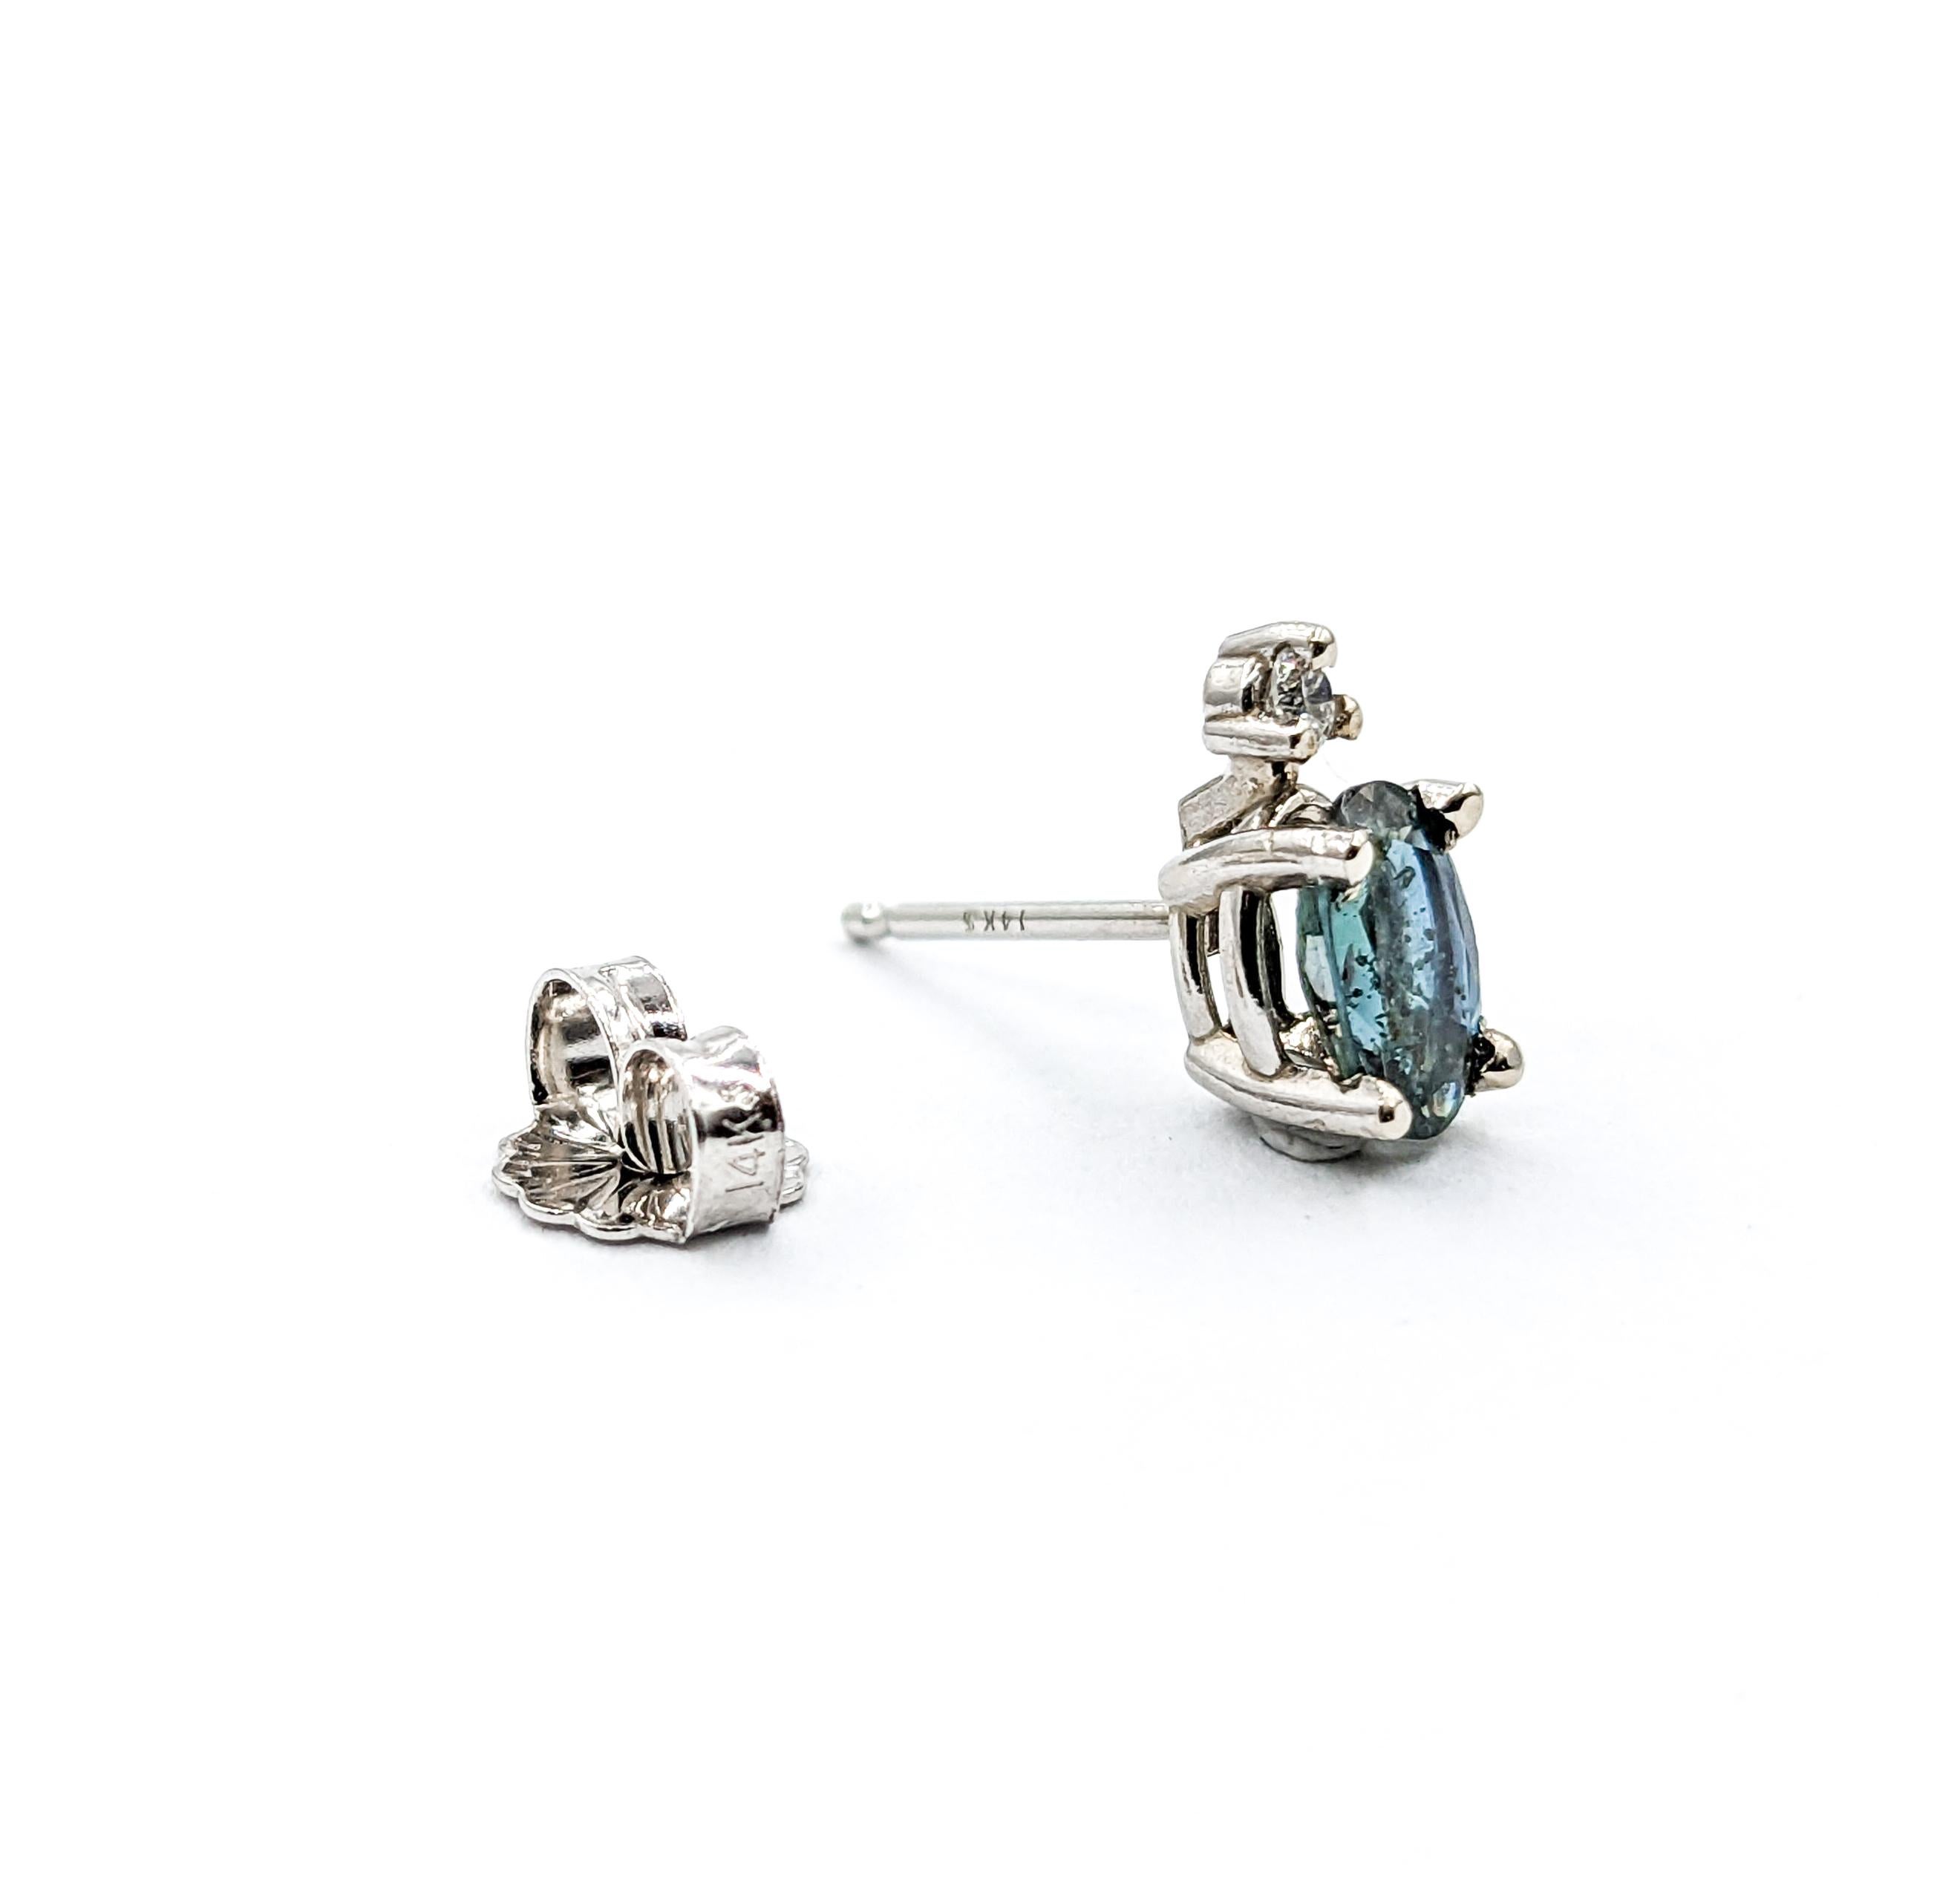 Natural Alexandrite & Diamond Stud Earrings In White Gold

Introducing our exquisite Natural Alexandrite earrings in 14k White Gold, a perfect blend of elegance and sophistication. These earrings showcase stunning 1.30ctw Alexandrite gemstones. The